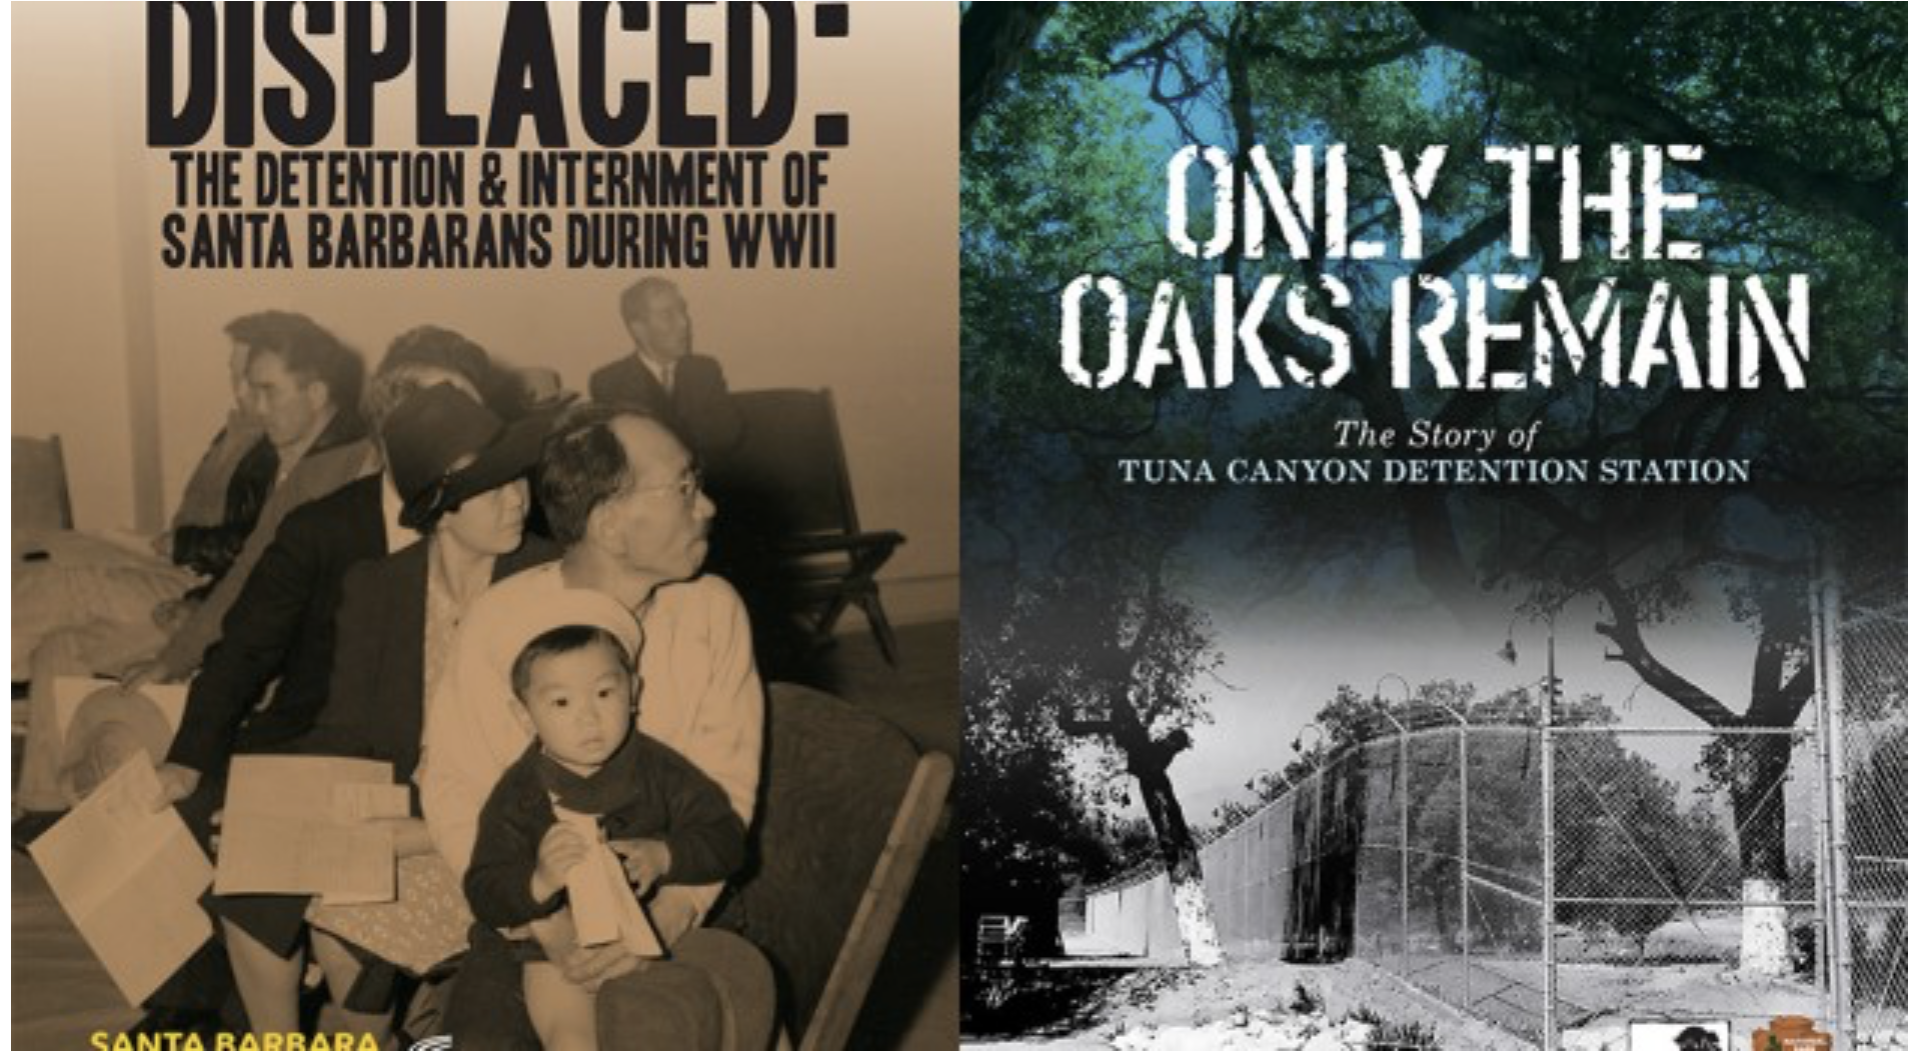 Oaks Remain:Displaced posters